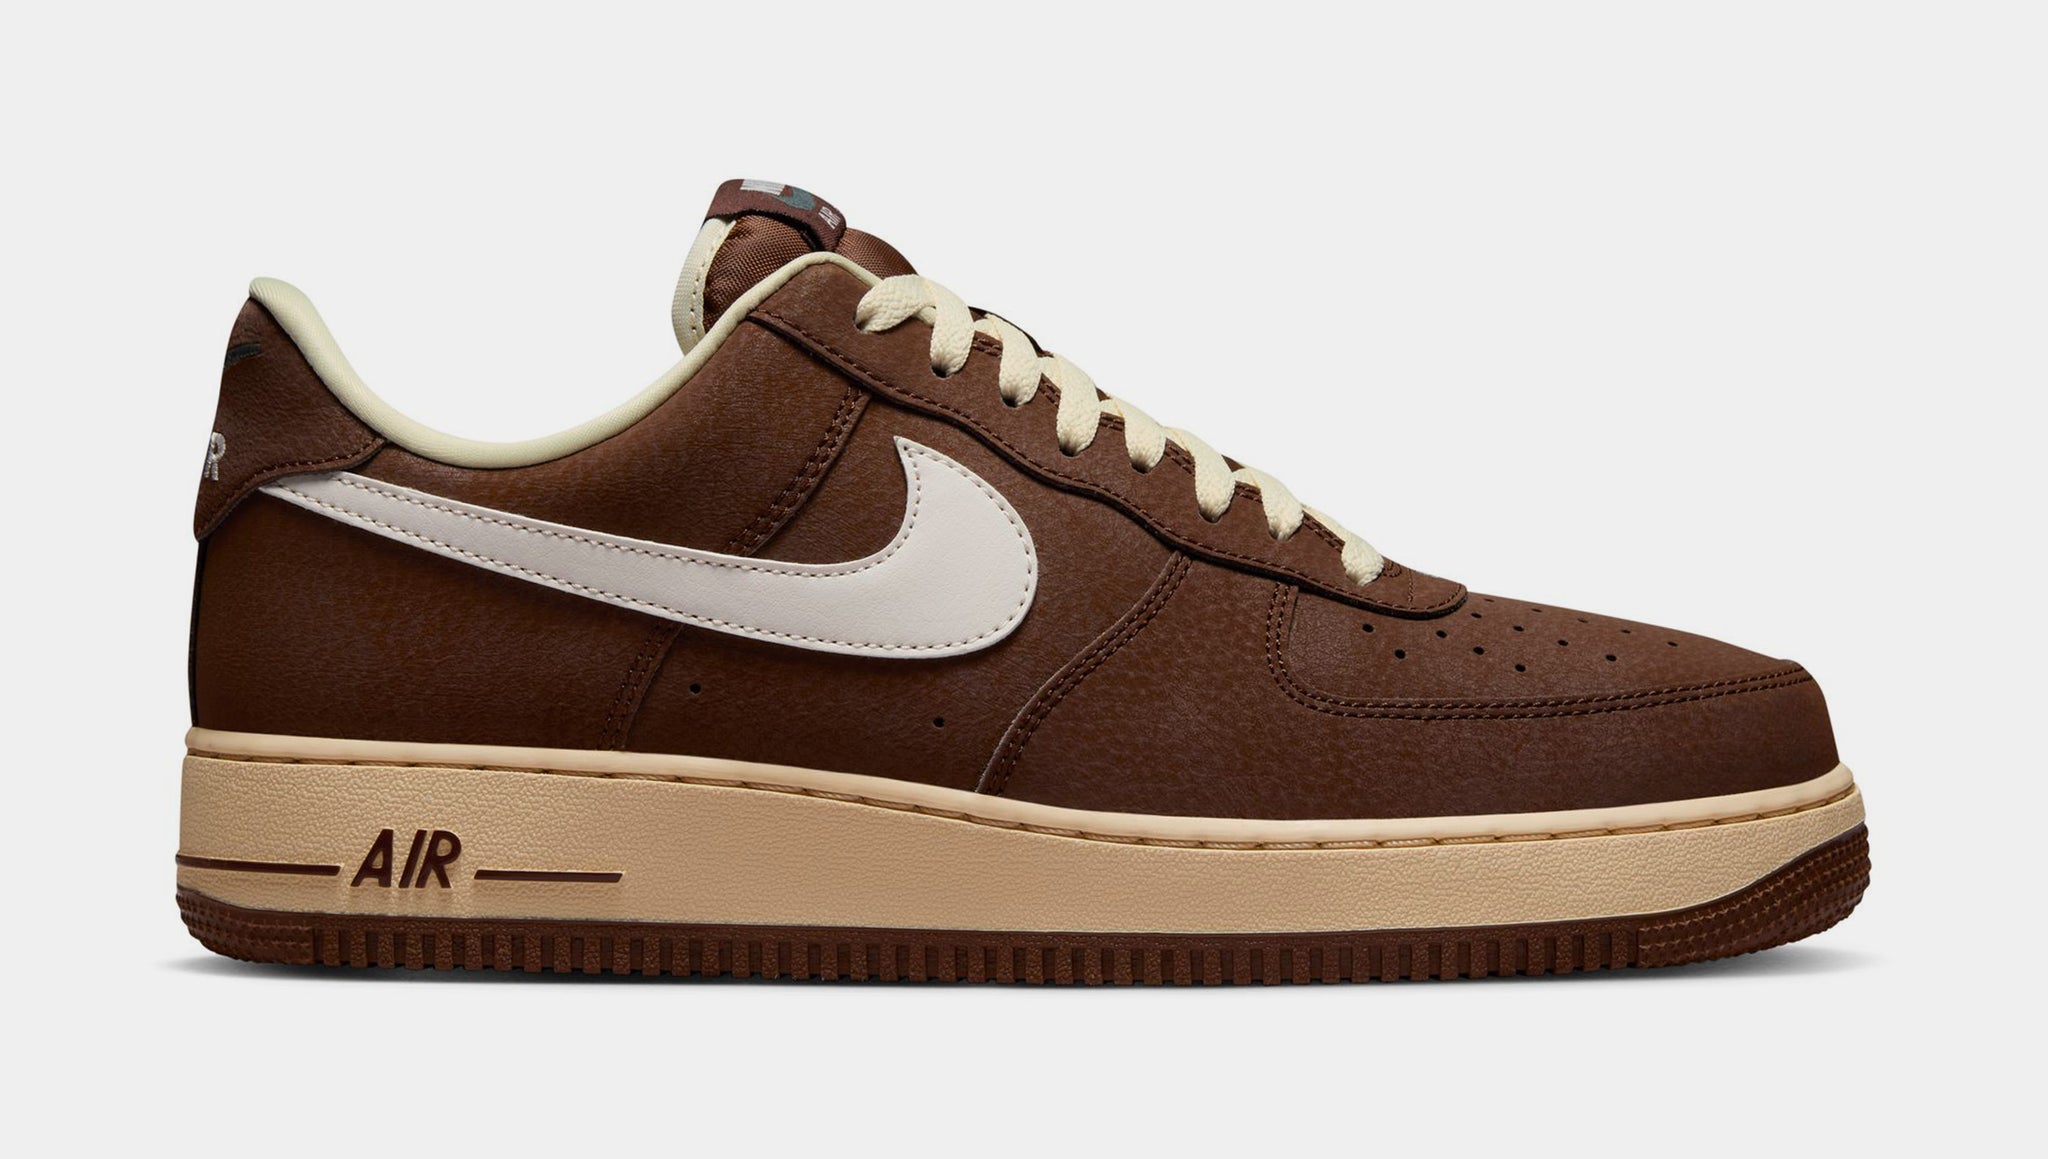 Air Force 1 '07 Low Mens Lifestyle Shoes (Cacao/Coconut Milk)